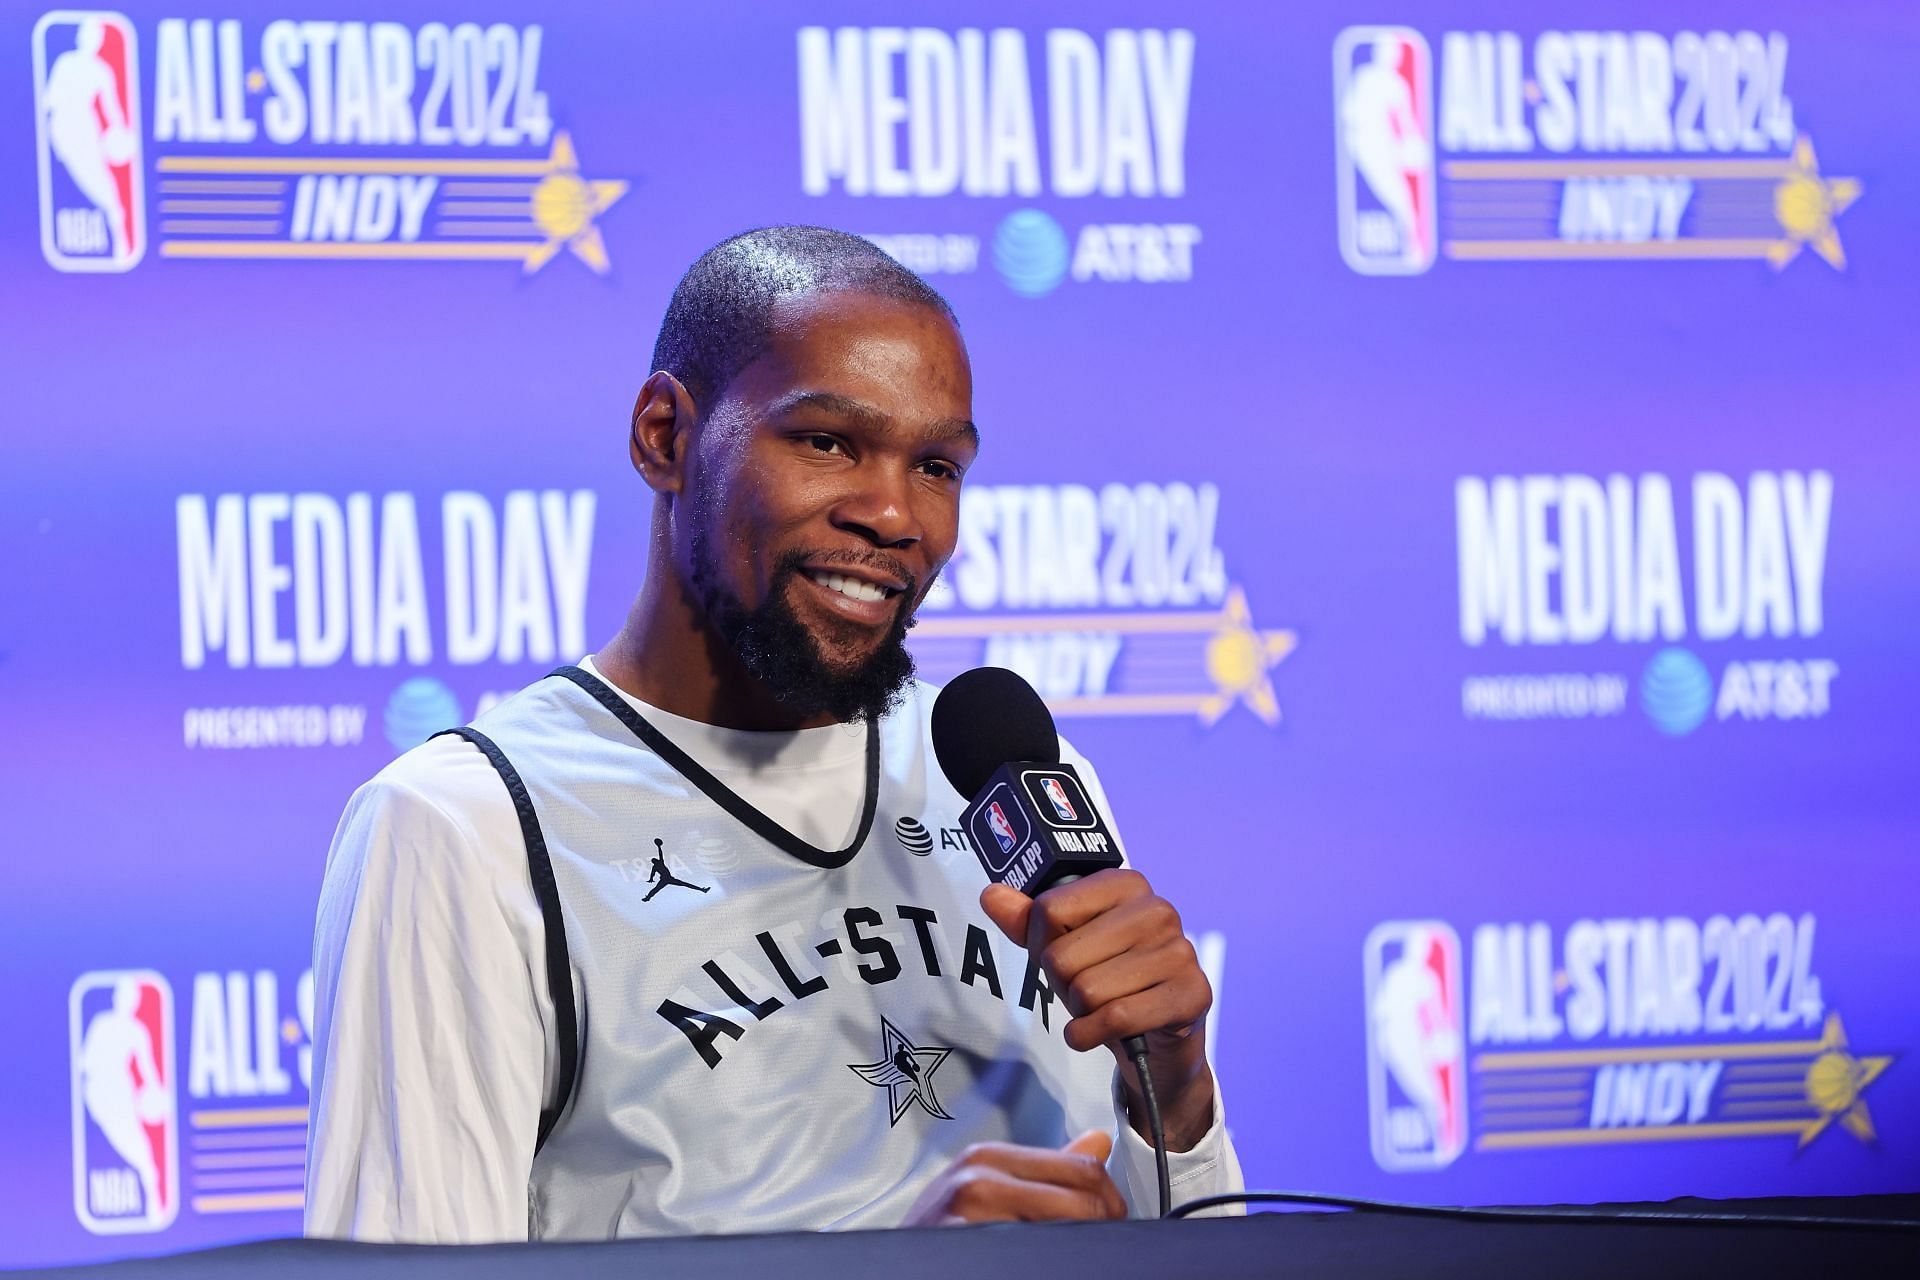 Kevin Durant offered some advice to young NBA stars.